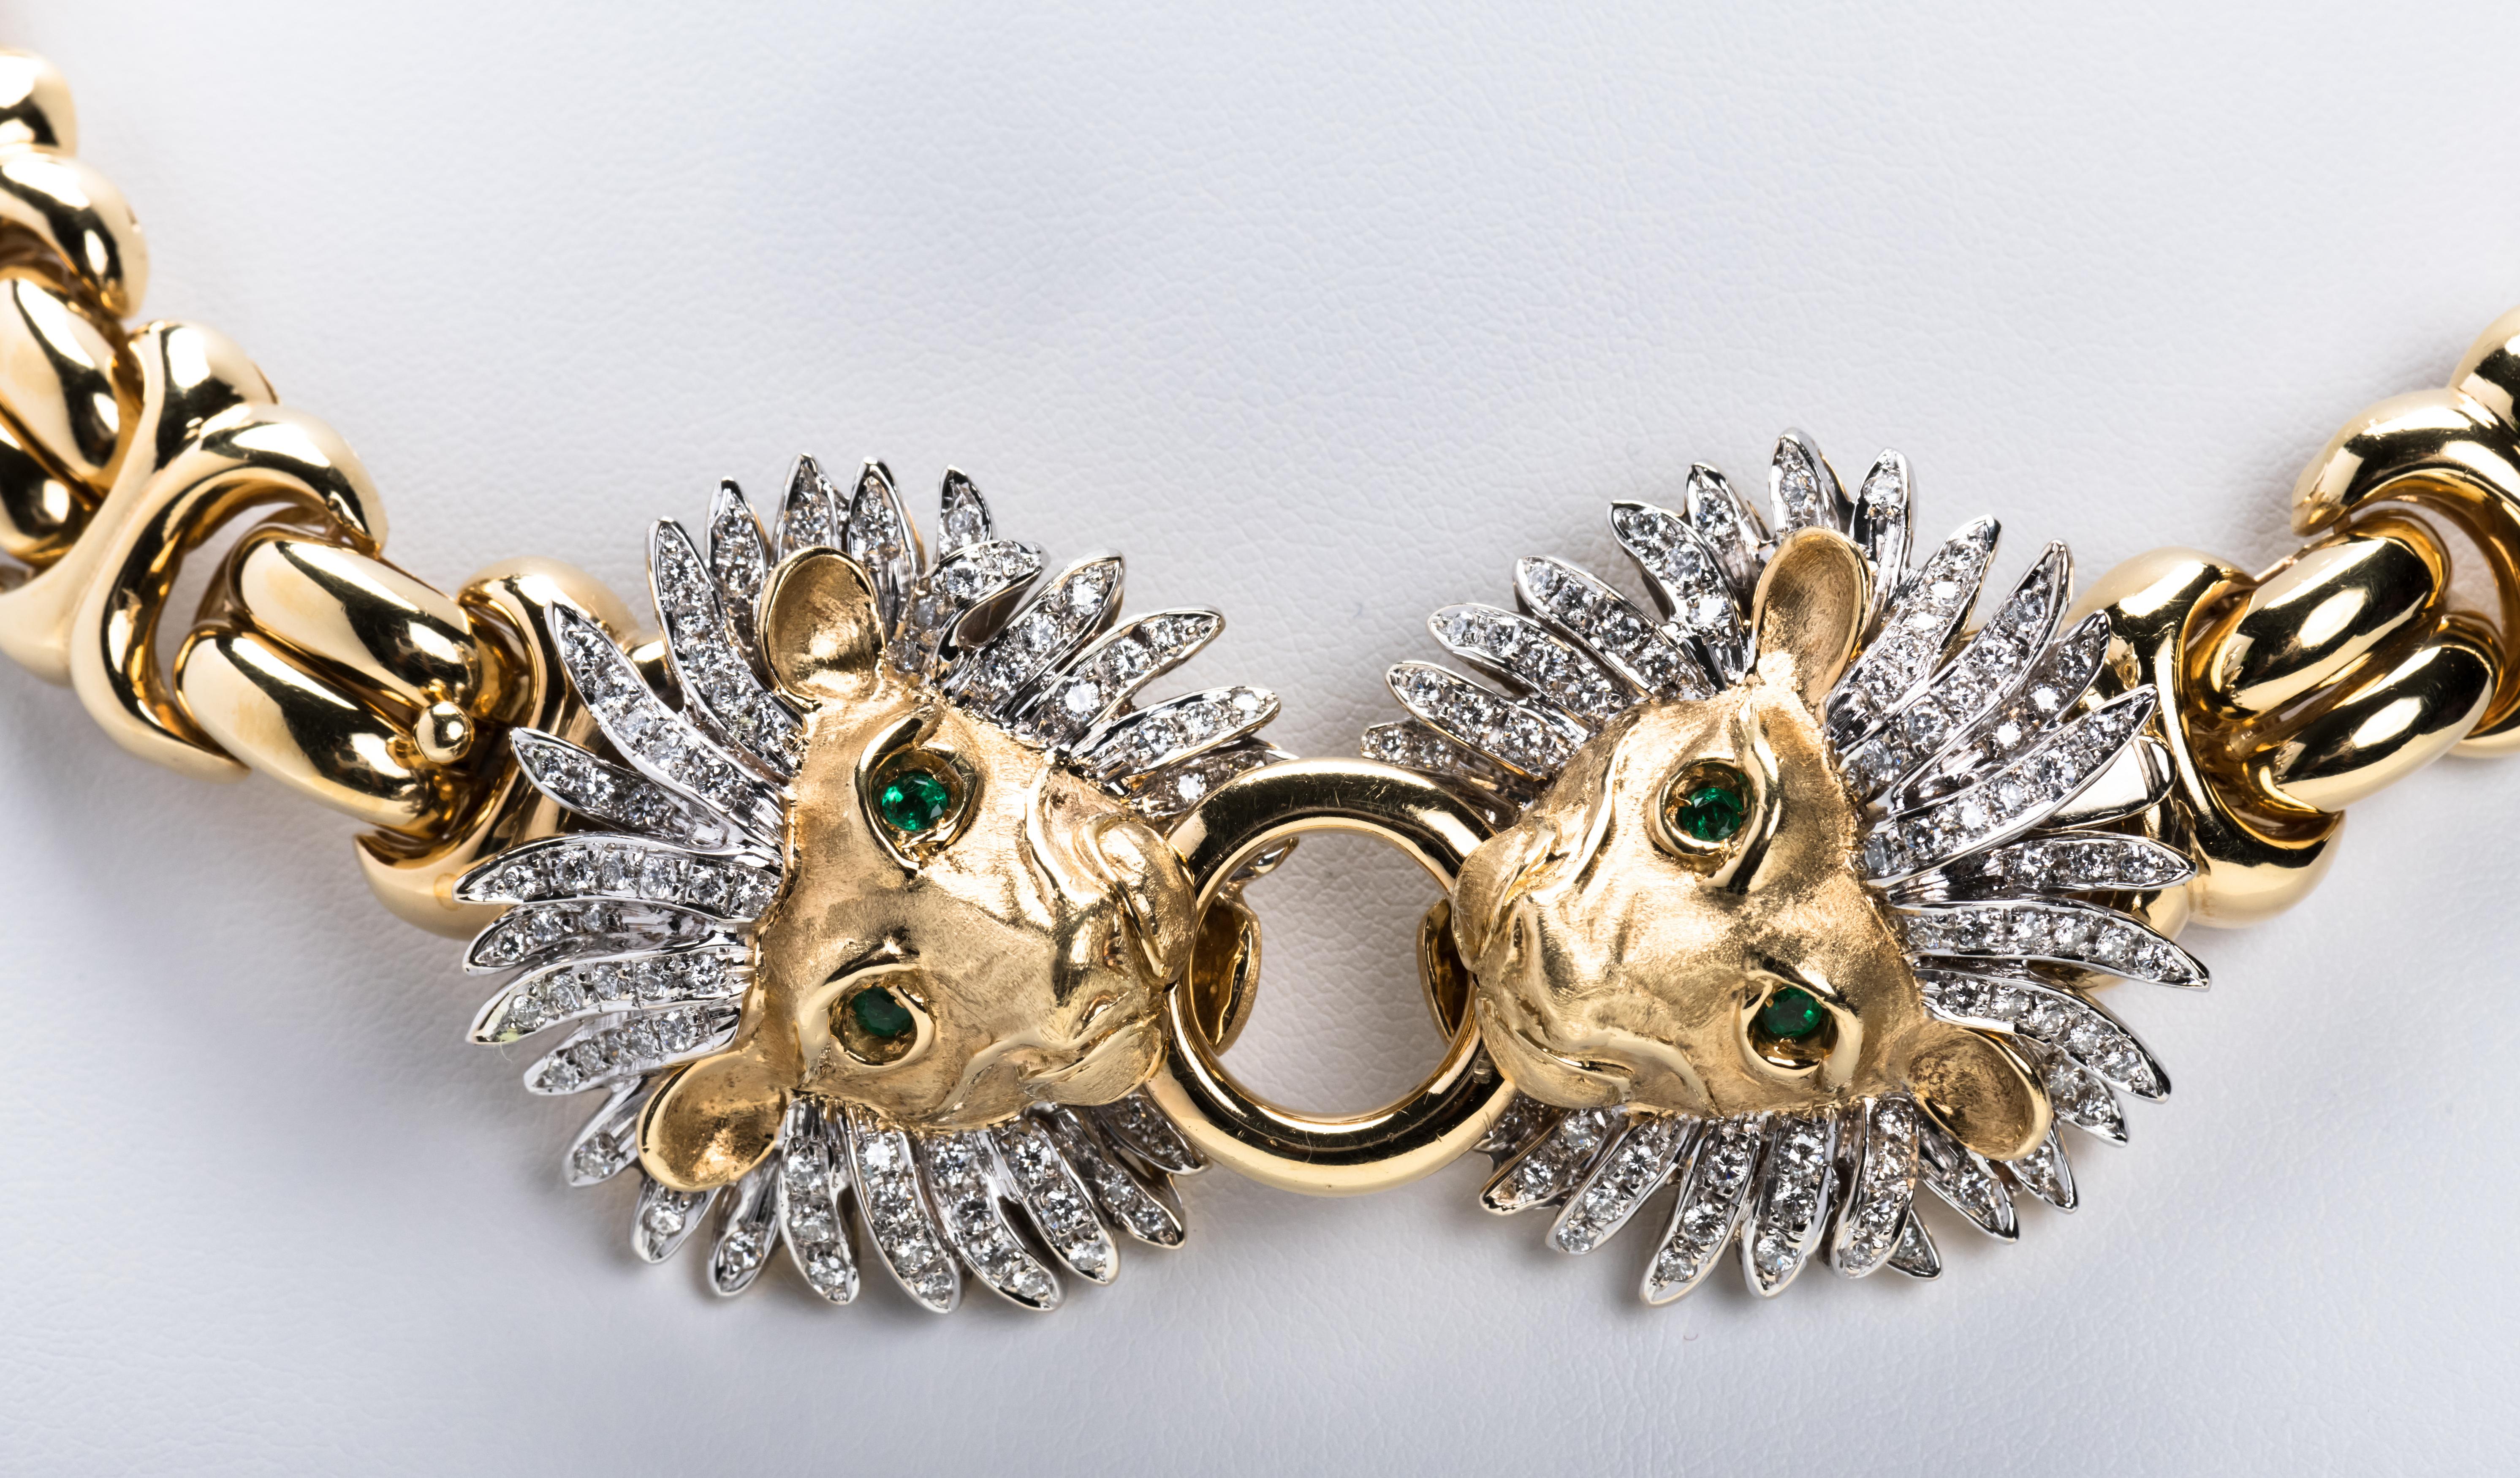 Highly stylized 18 karat gold Italian hand made collar necklace with interconnecting links. The bottom of the necklace has two large lion heads with inset diamonds in the manes and inset emerald eyes. The quality and craftsmanship is